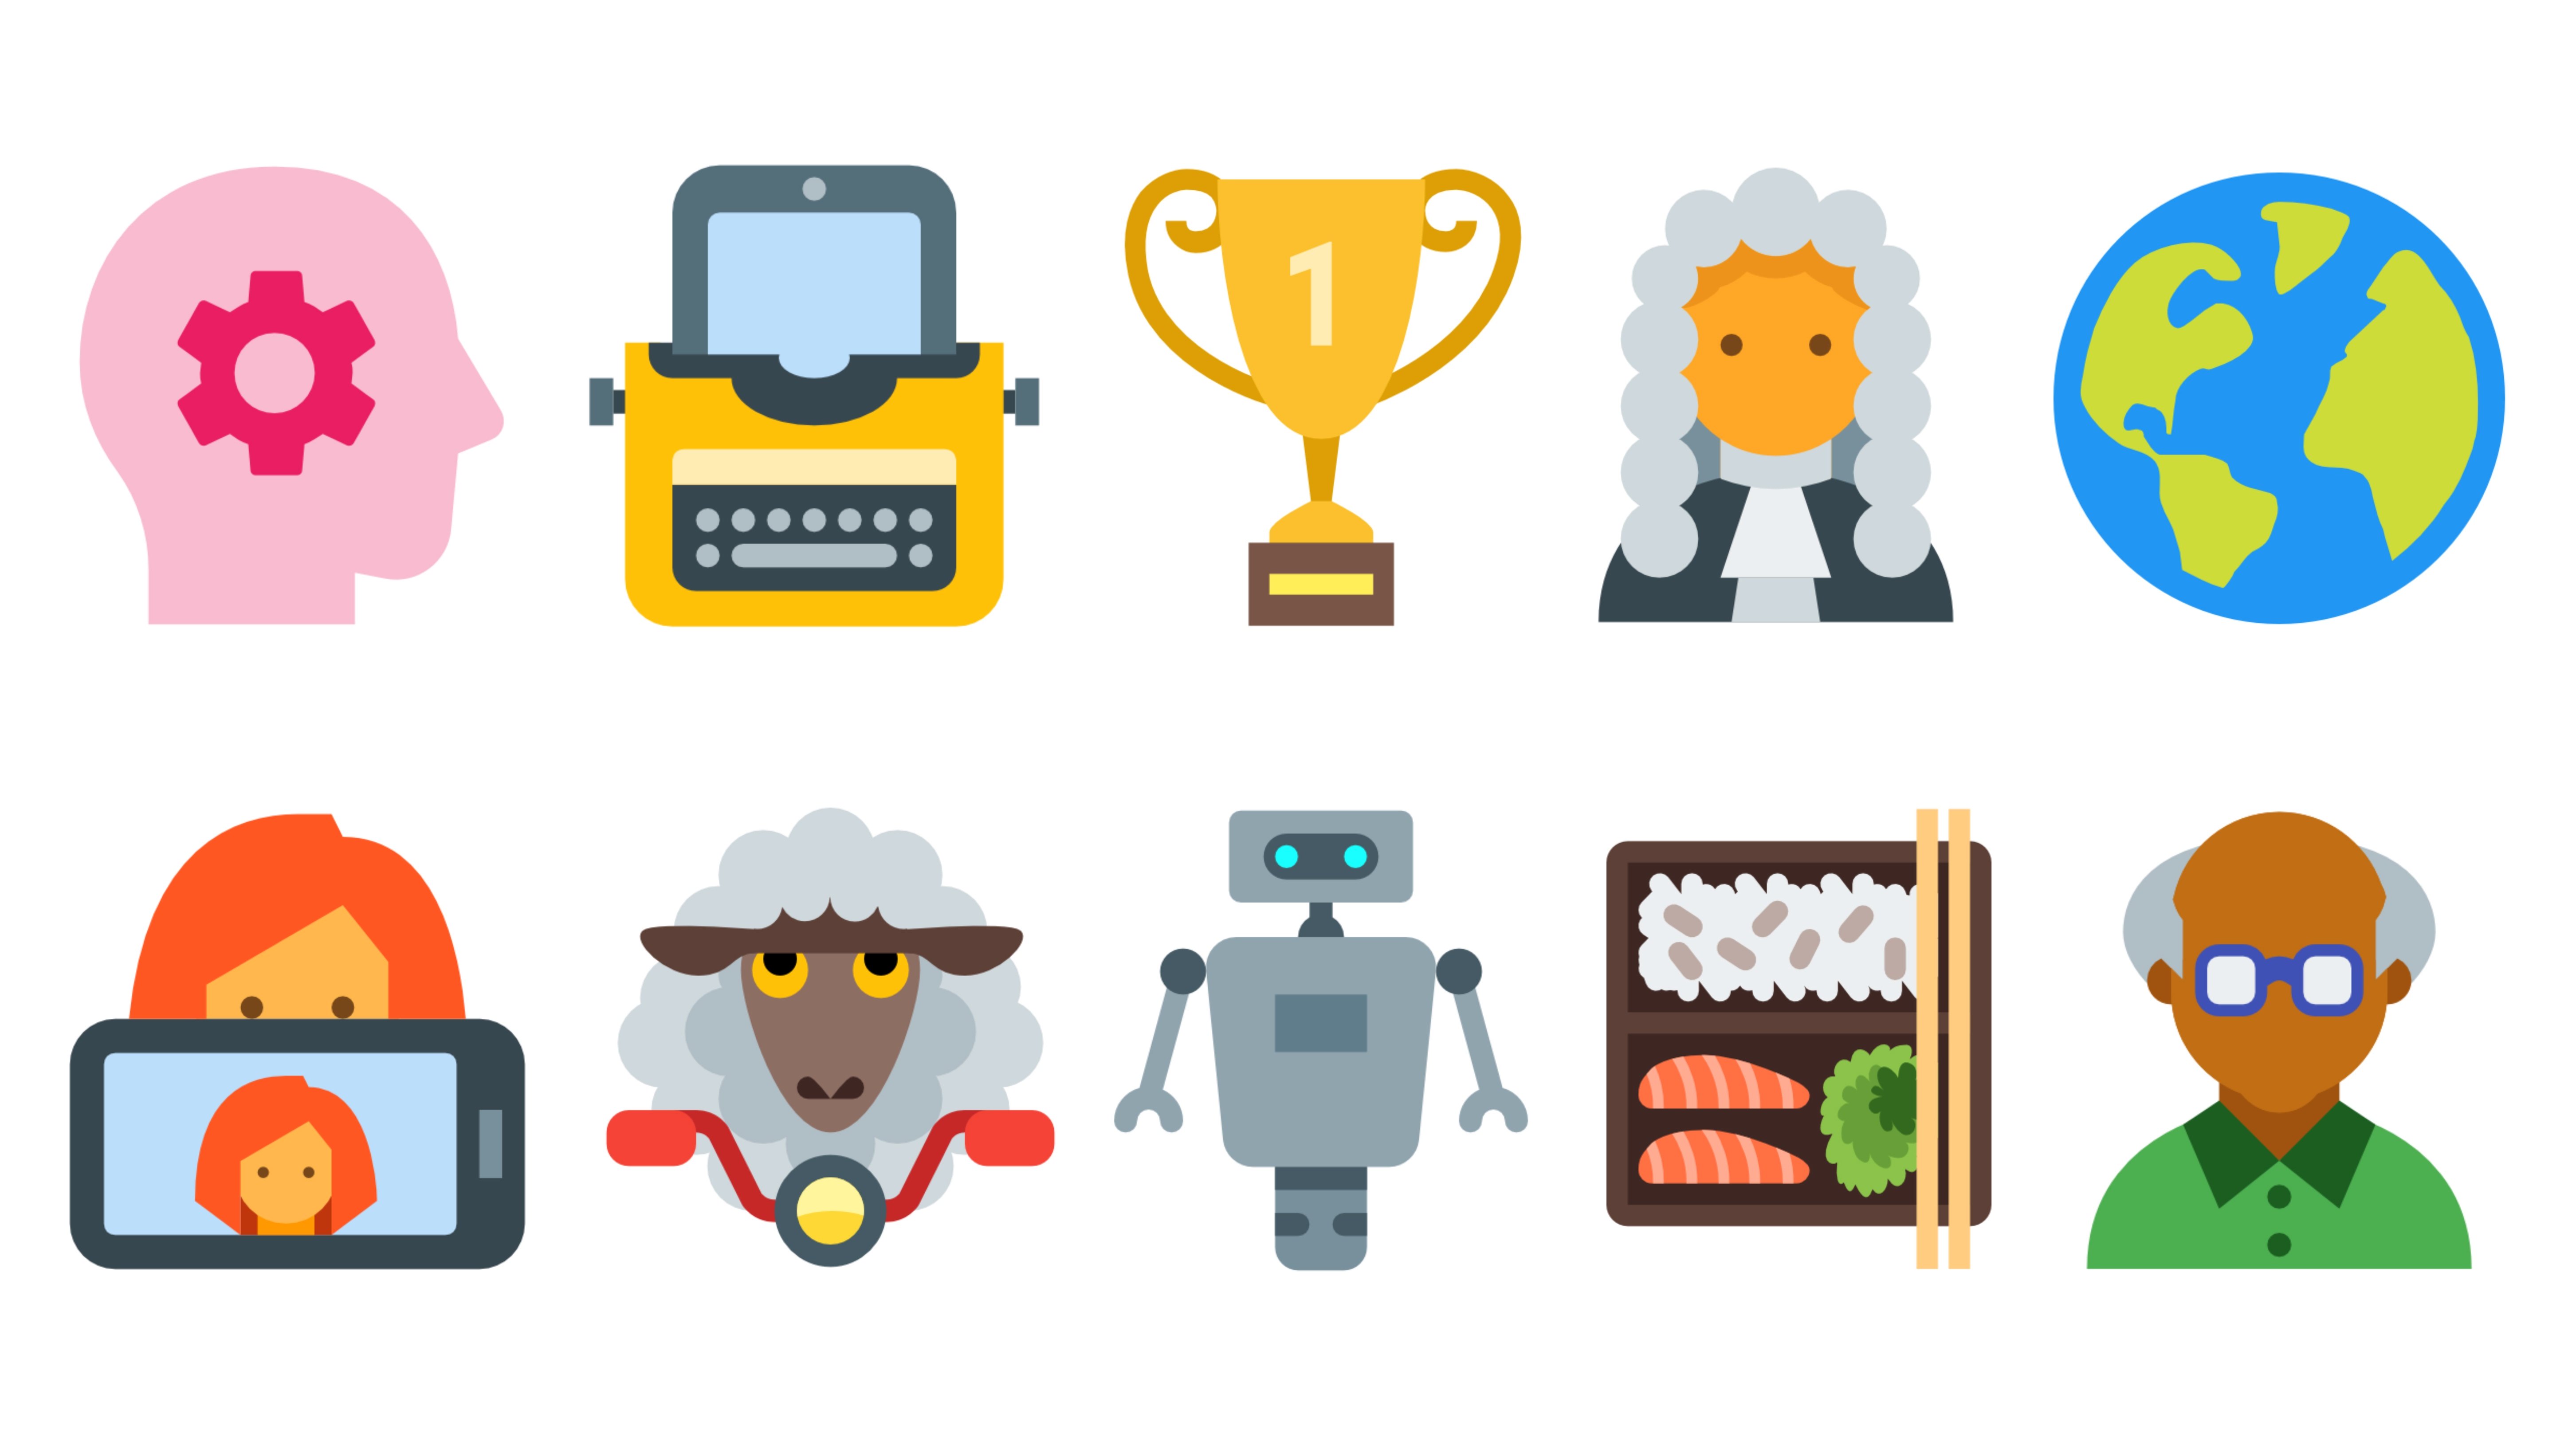 10 free clipart images for your next PowerPoint.